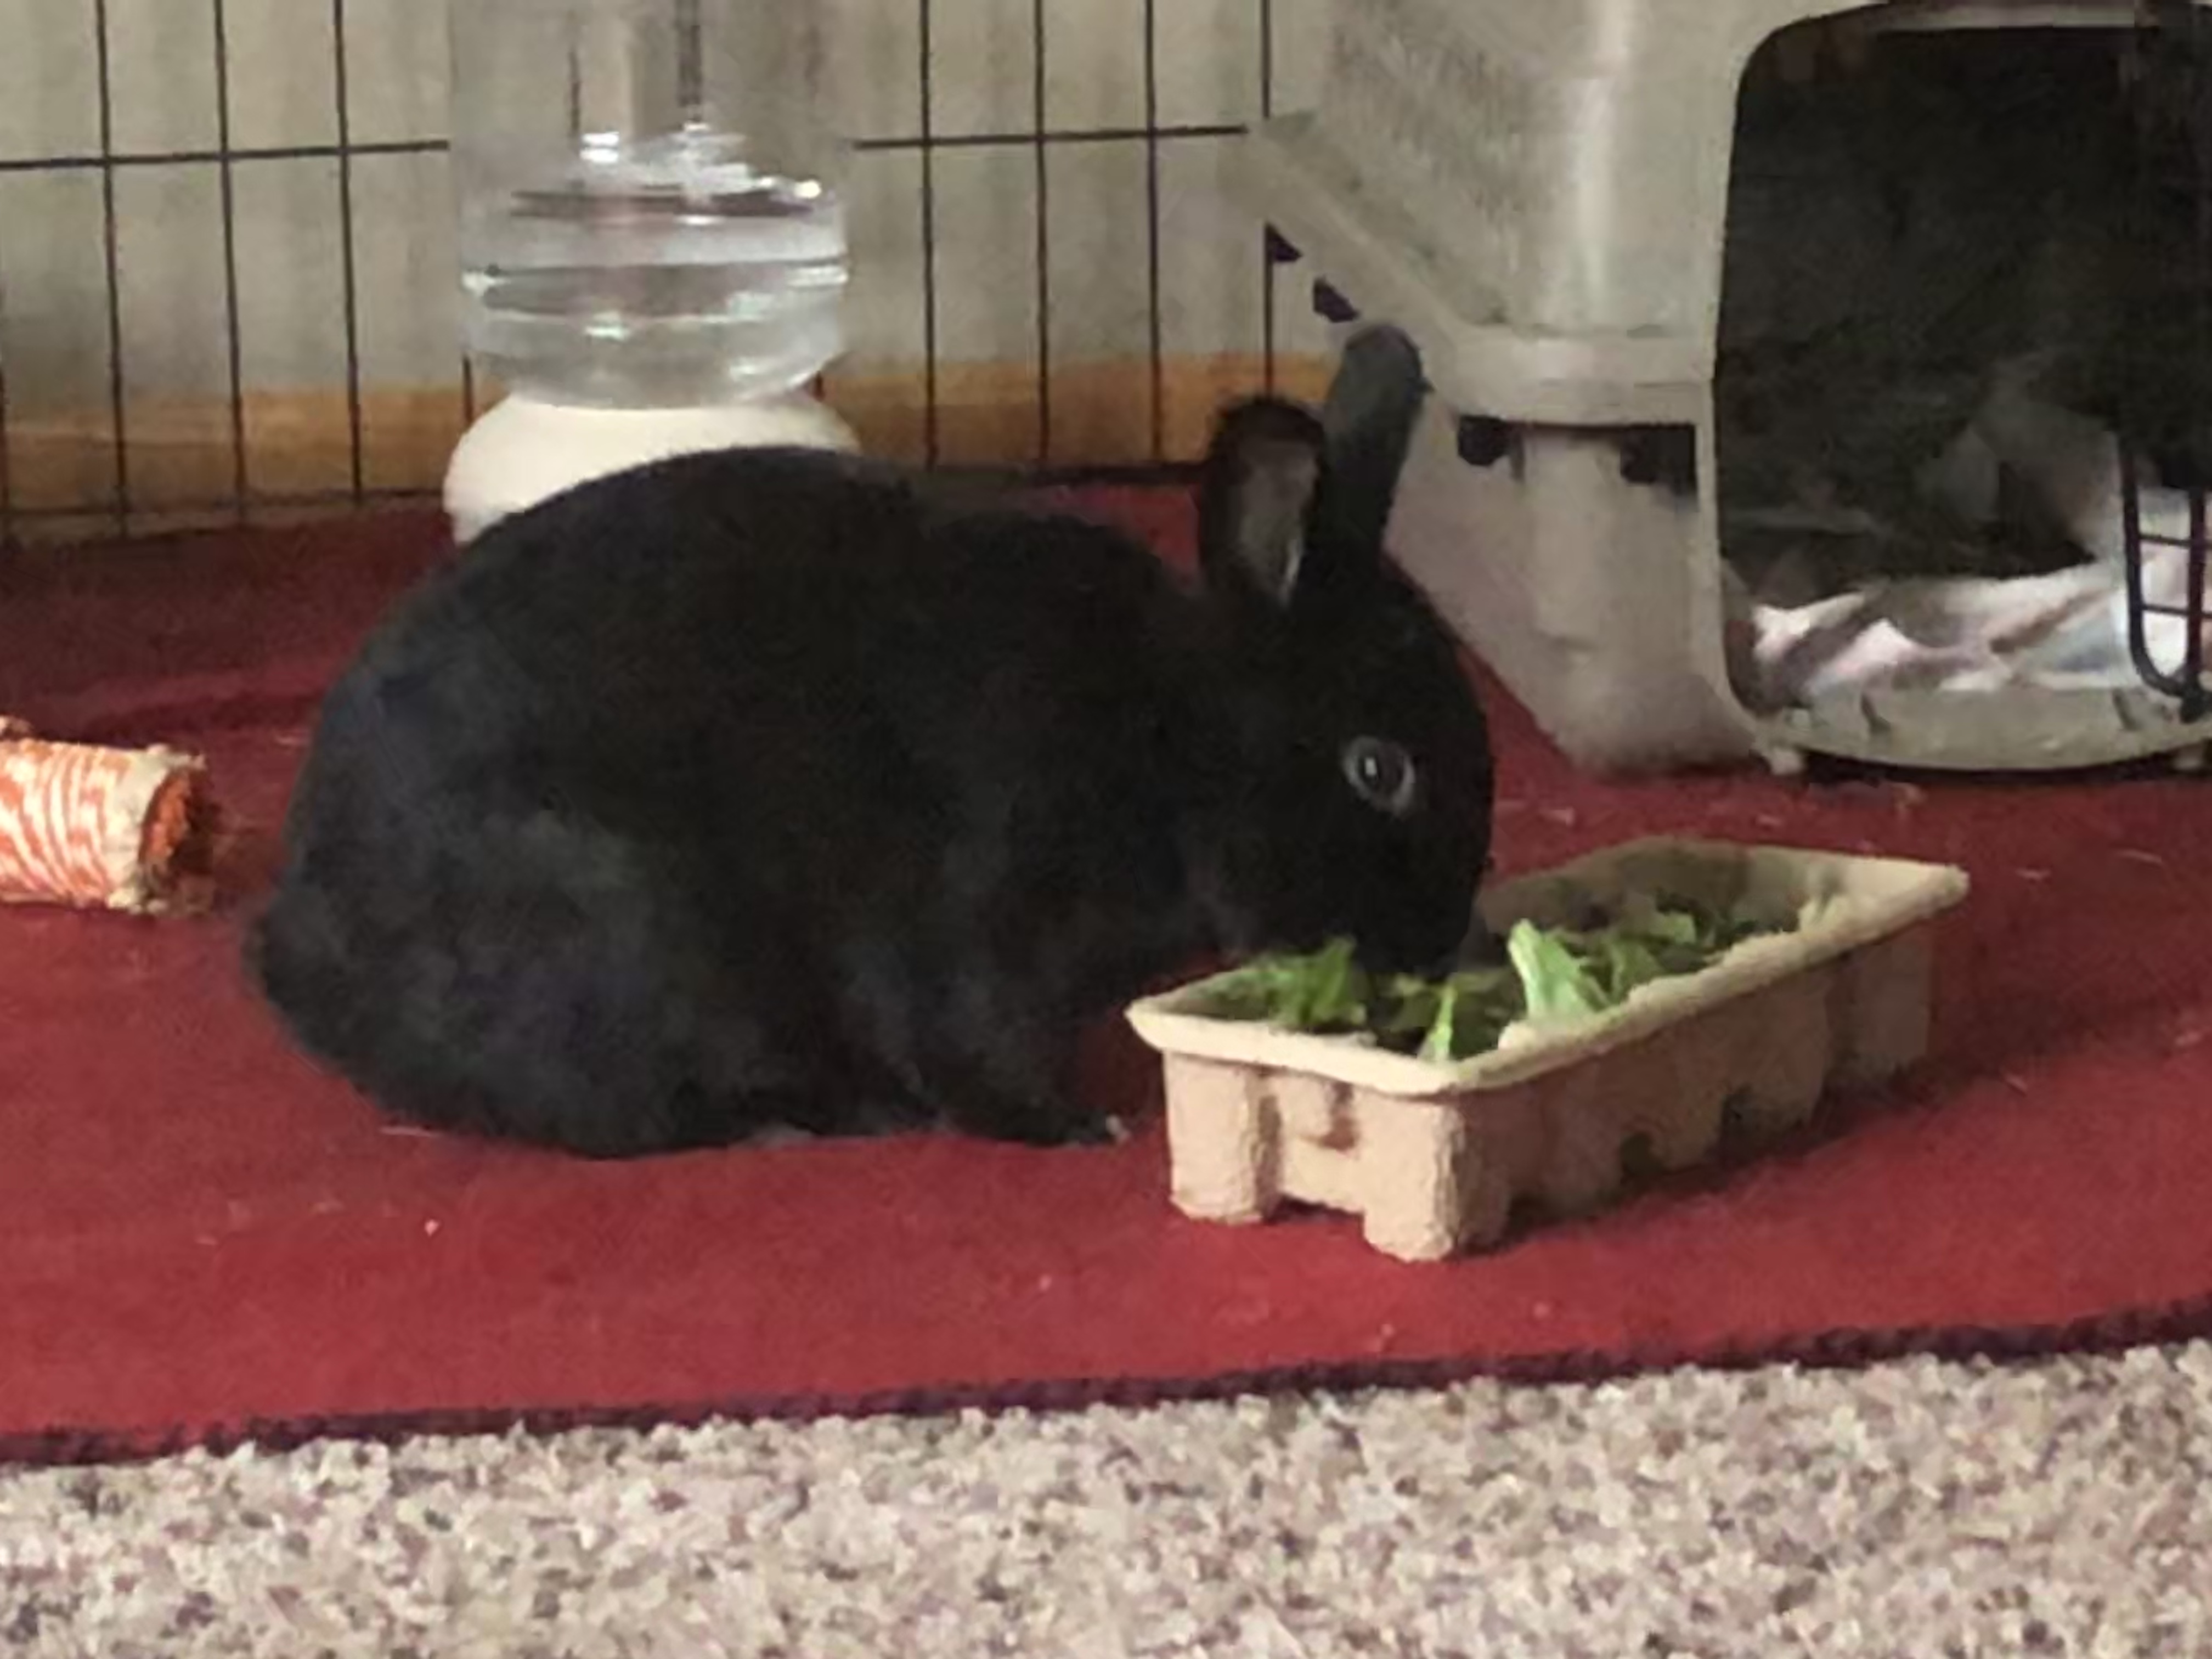 Pepper, a rabbit taken into foster care amid the COVID-19 pandemic, enjoys some greens. Courtesy of Anne Bonney (Courtesy of Anne Bonney)